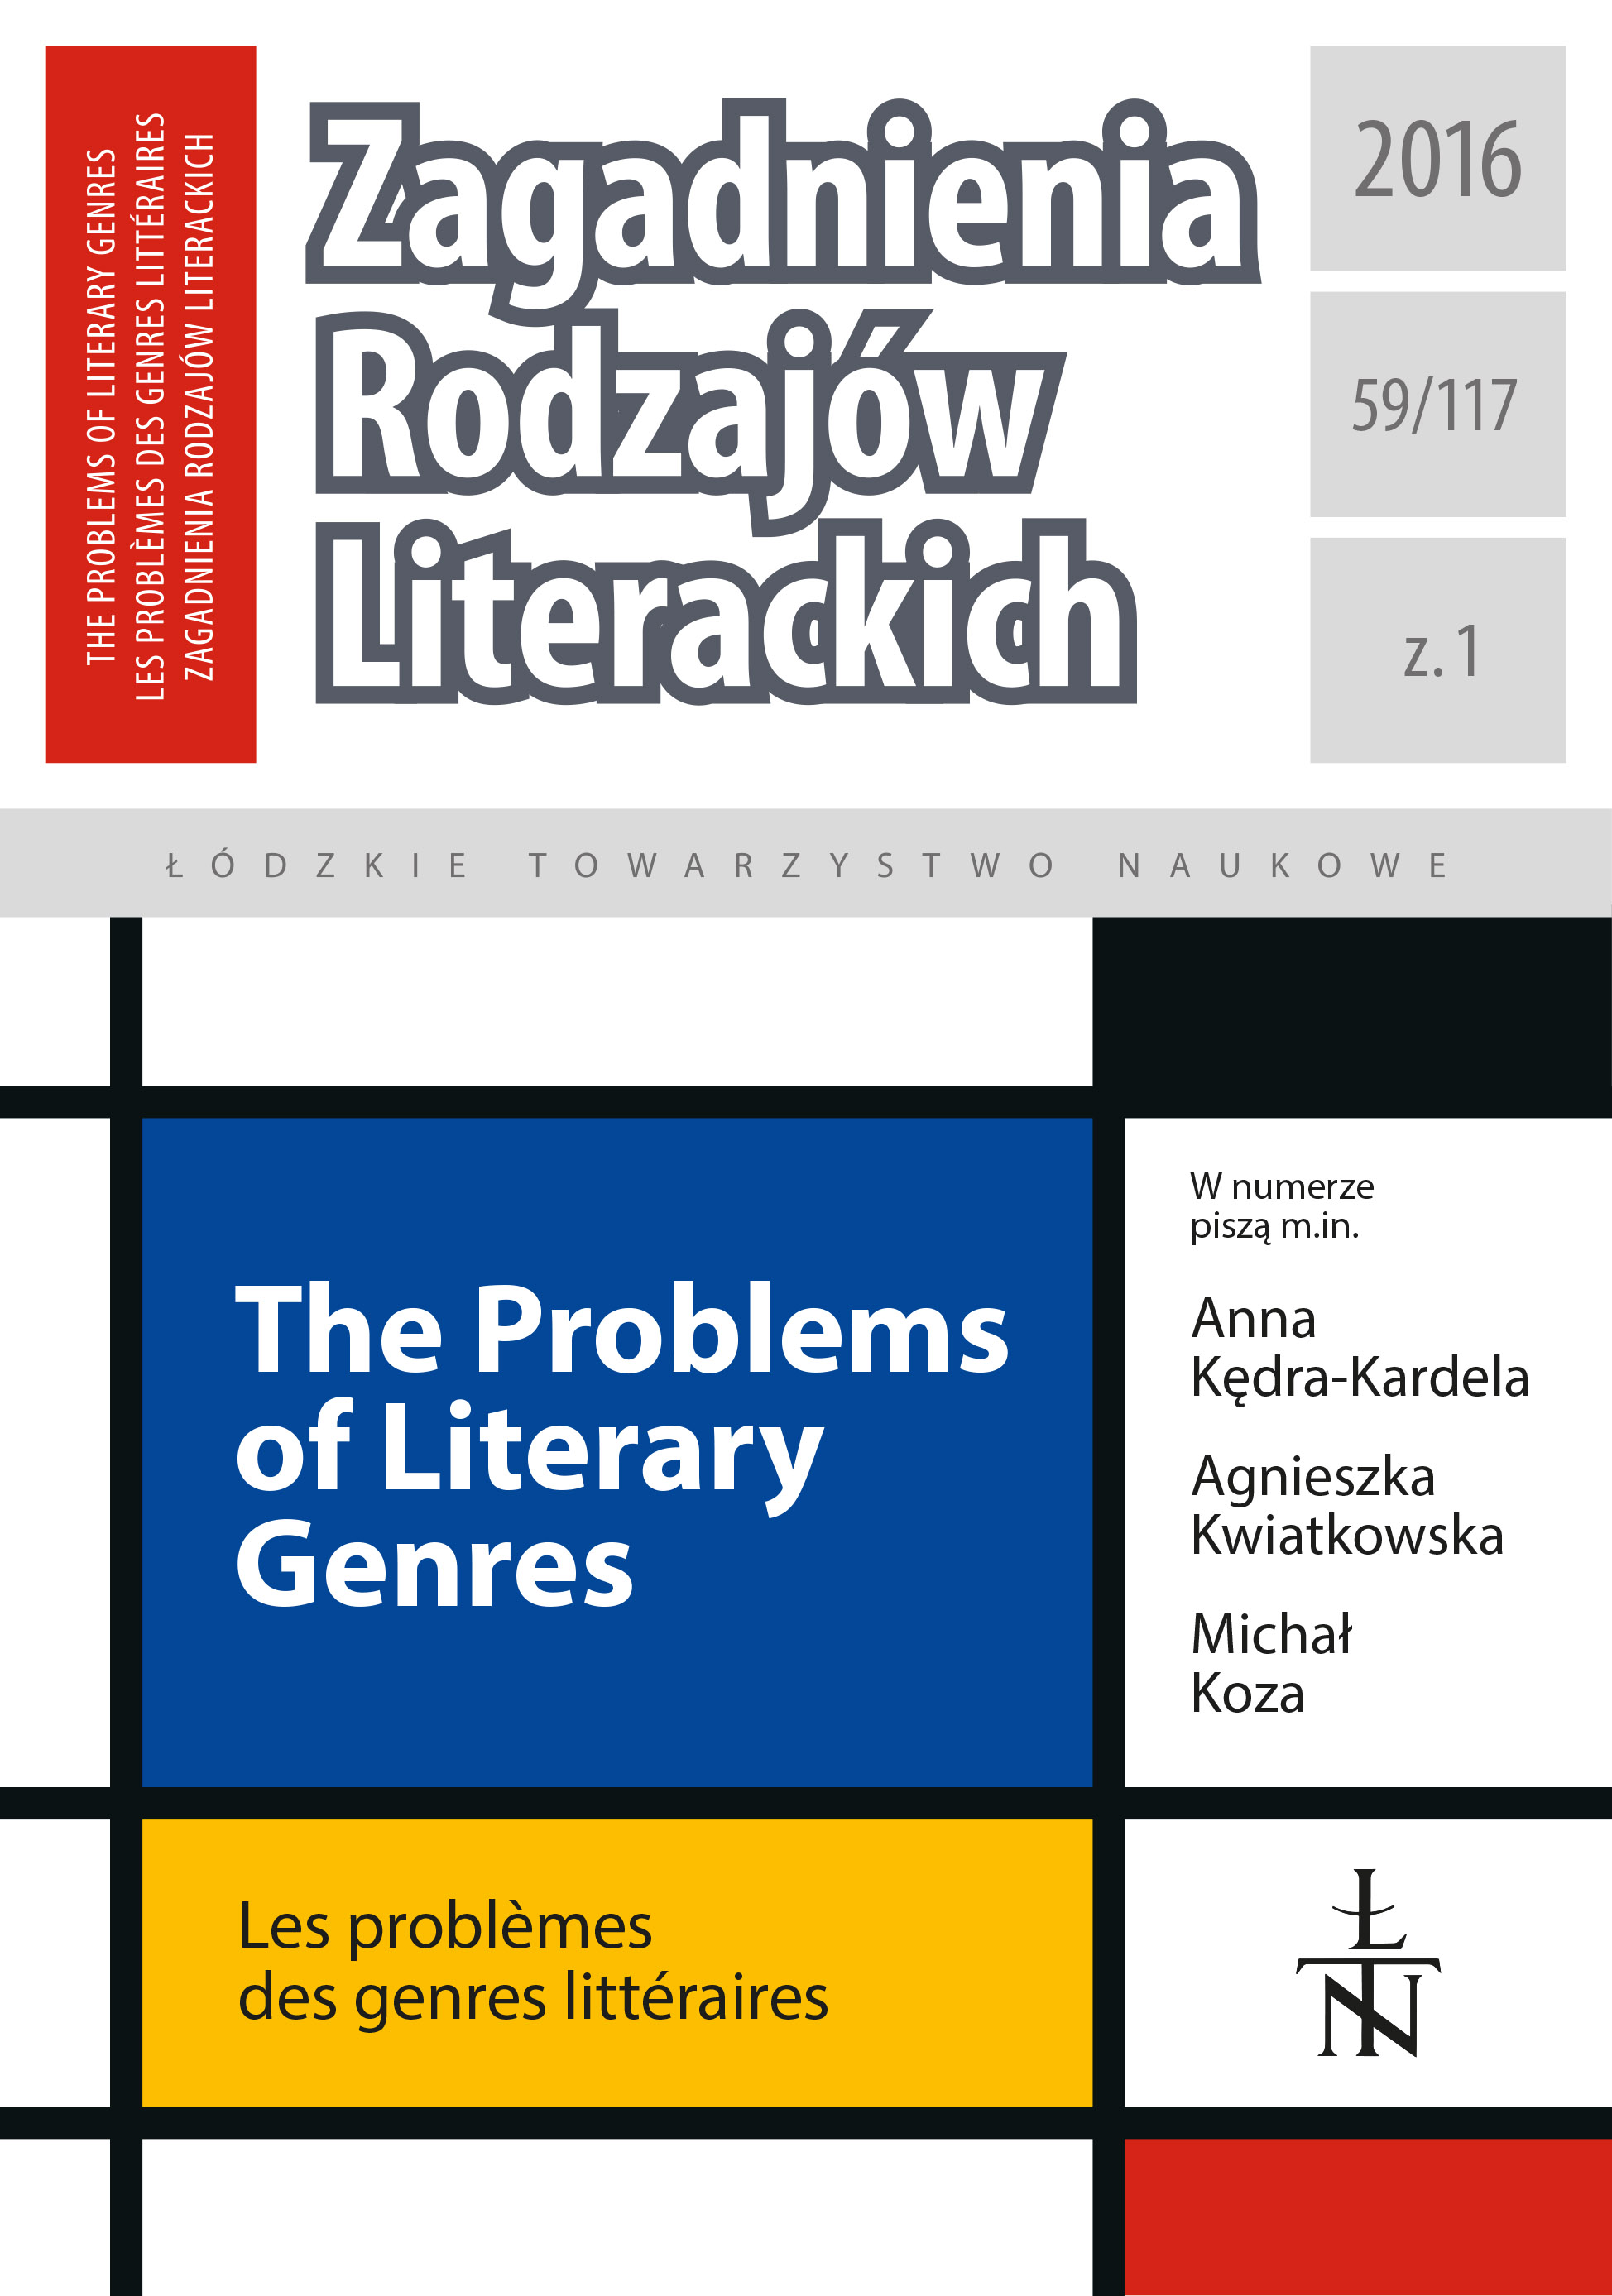 Julian Przyboś and the Literary Genres Cover Image